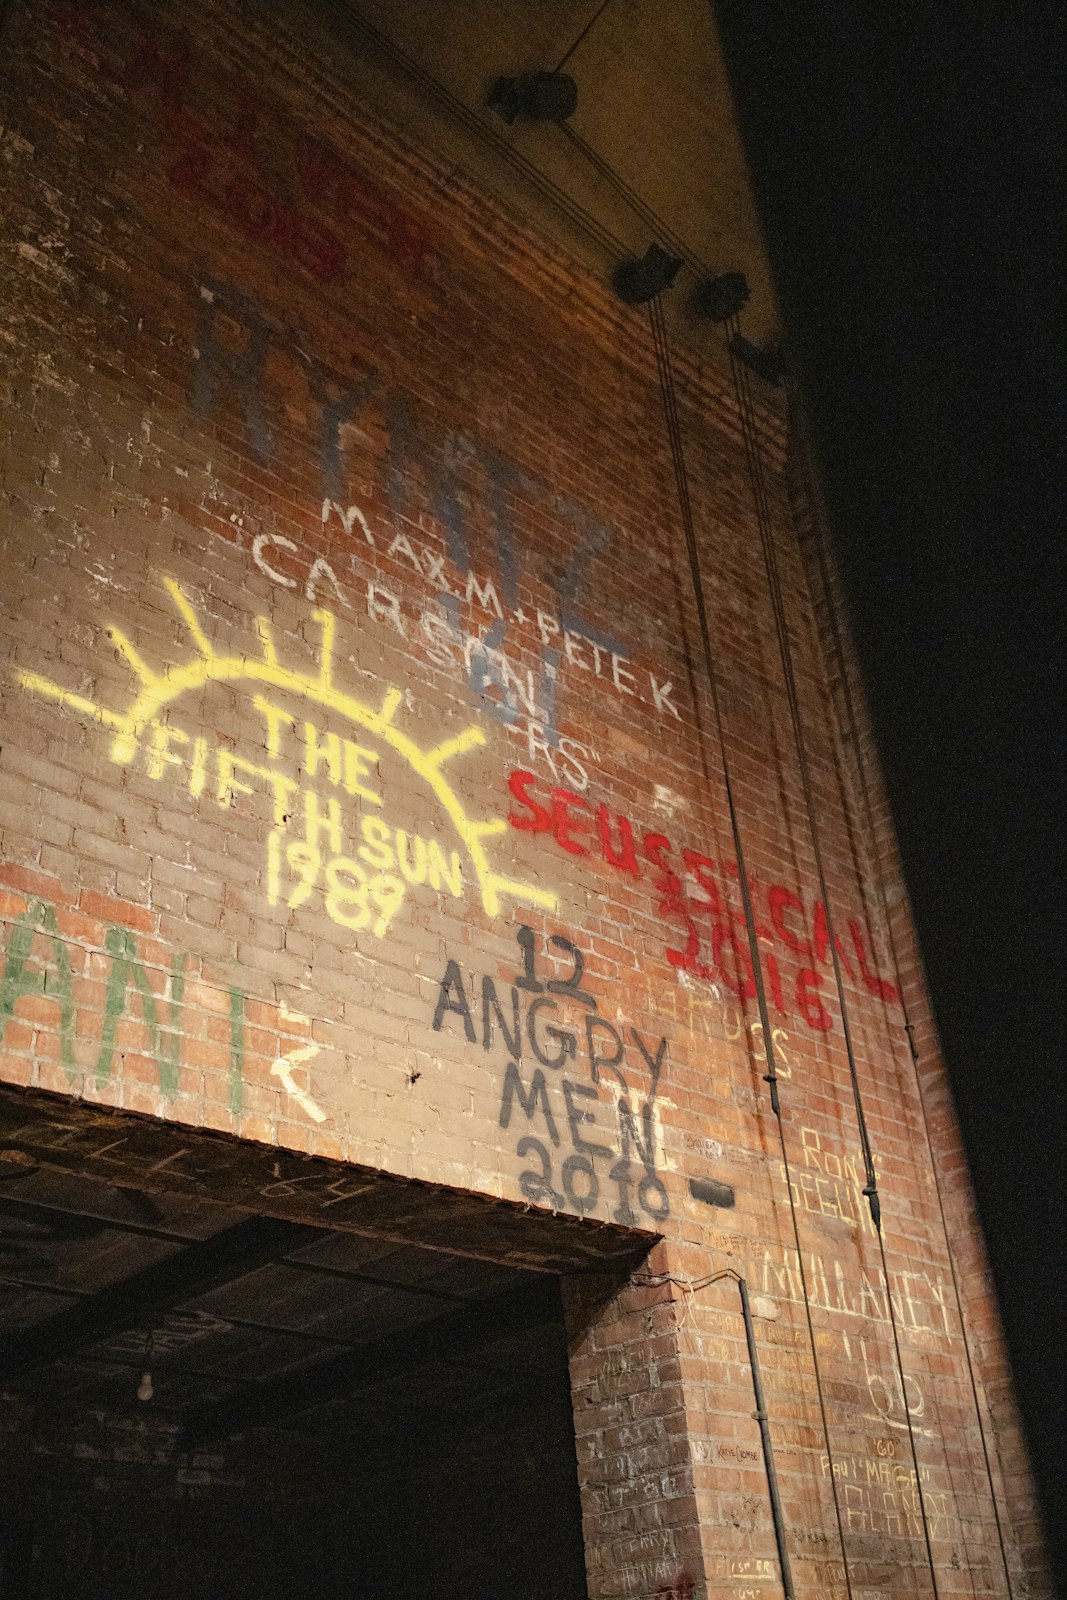 Graffiti on the wall behind the stage includes dates of previous performances, a living relic to Sacred Heart's rich theatrical past.